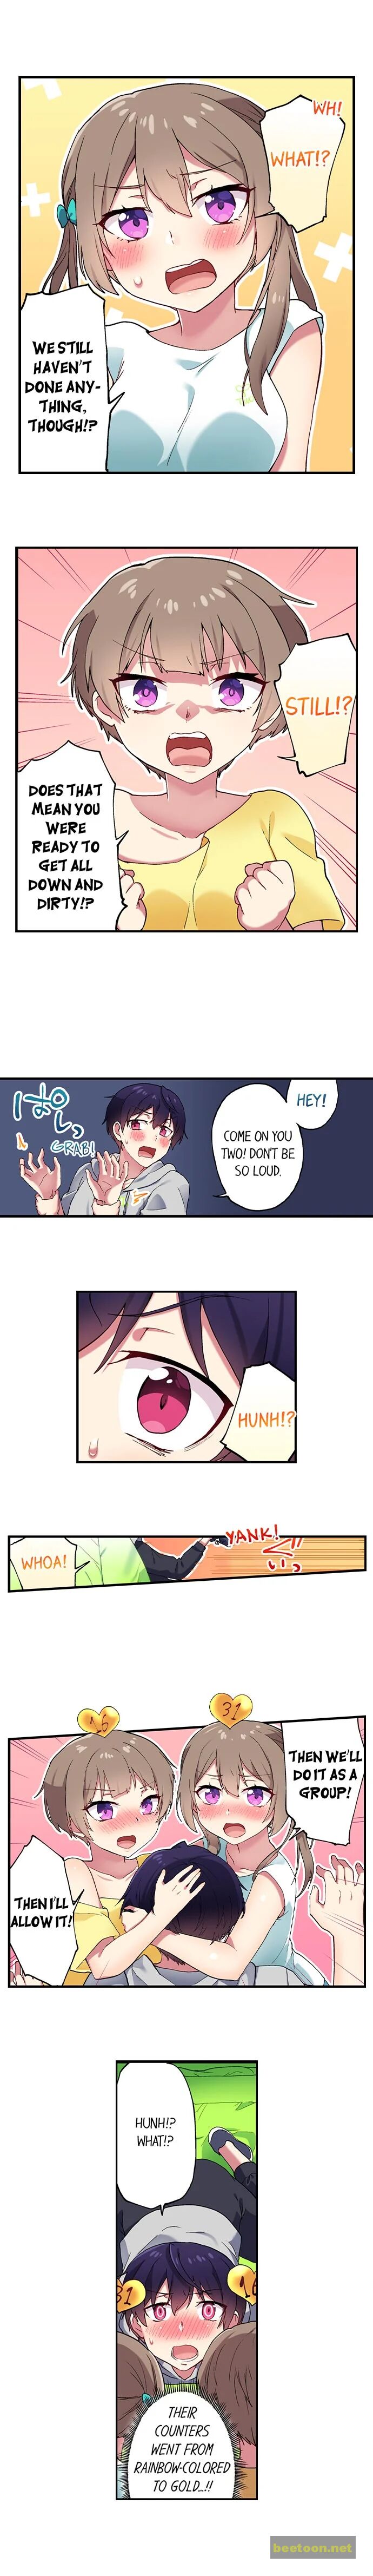 I Can See The Number Of Times People Orgasm Chapter 98 - HolyManga.net